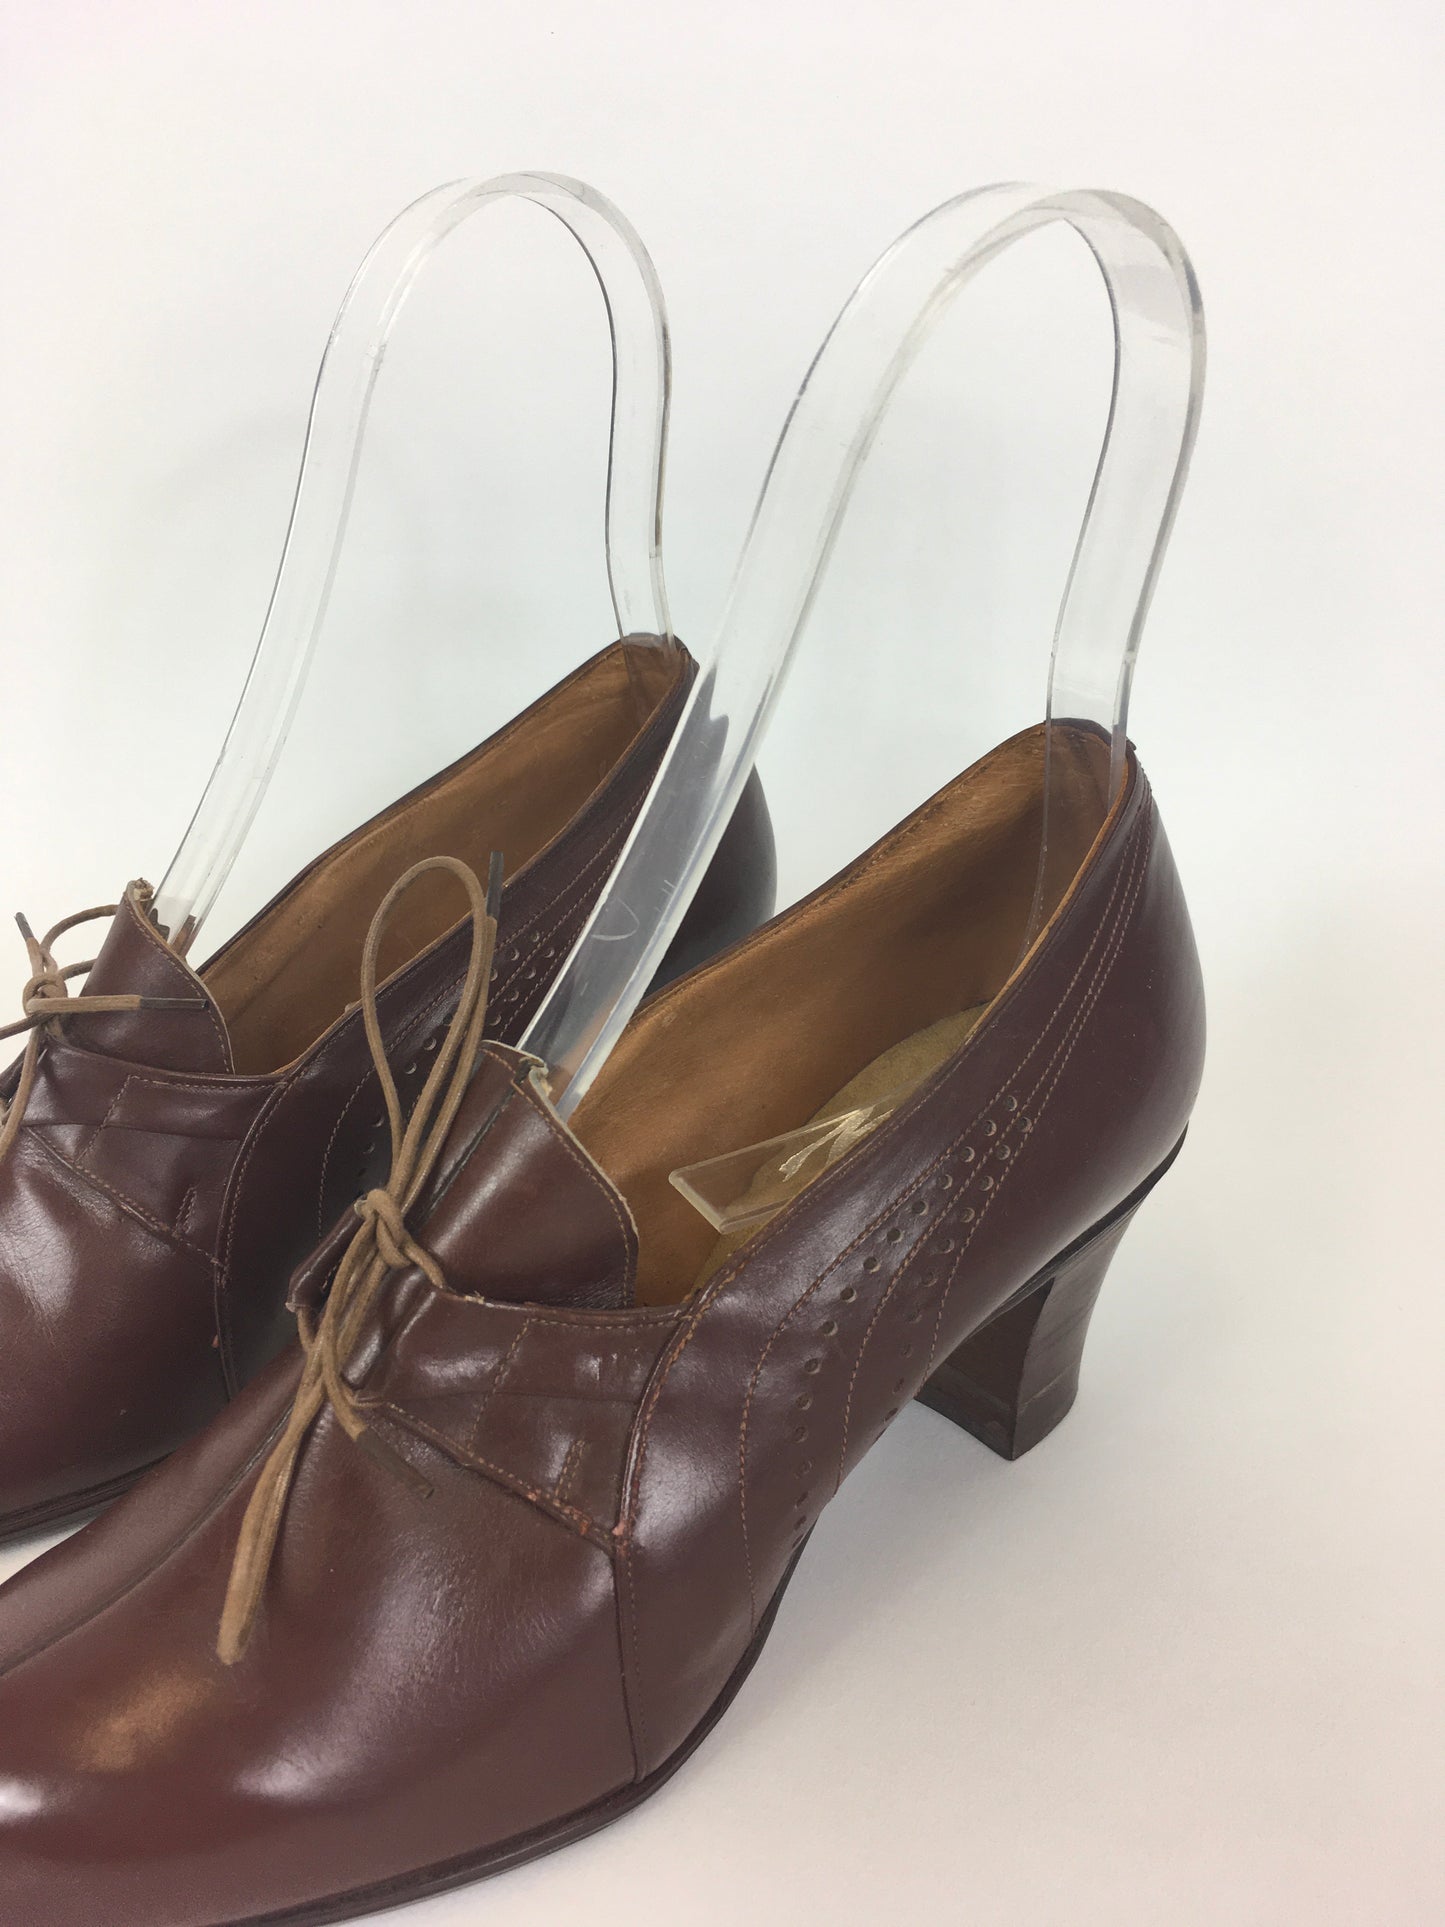 Original 1940’s STUNNING CC41 Brown Heeled Lace Up Brogues - By ‘ Cavette ‘